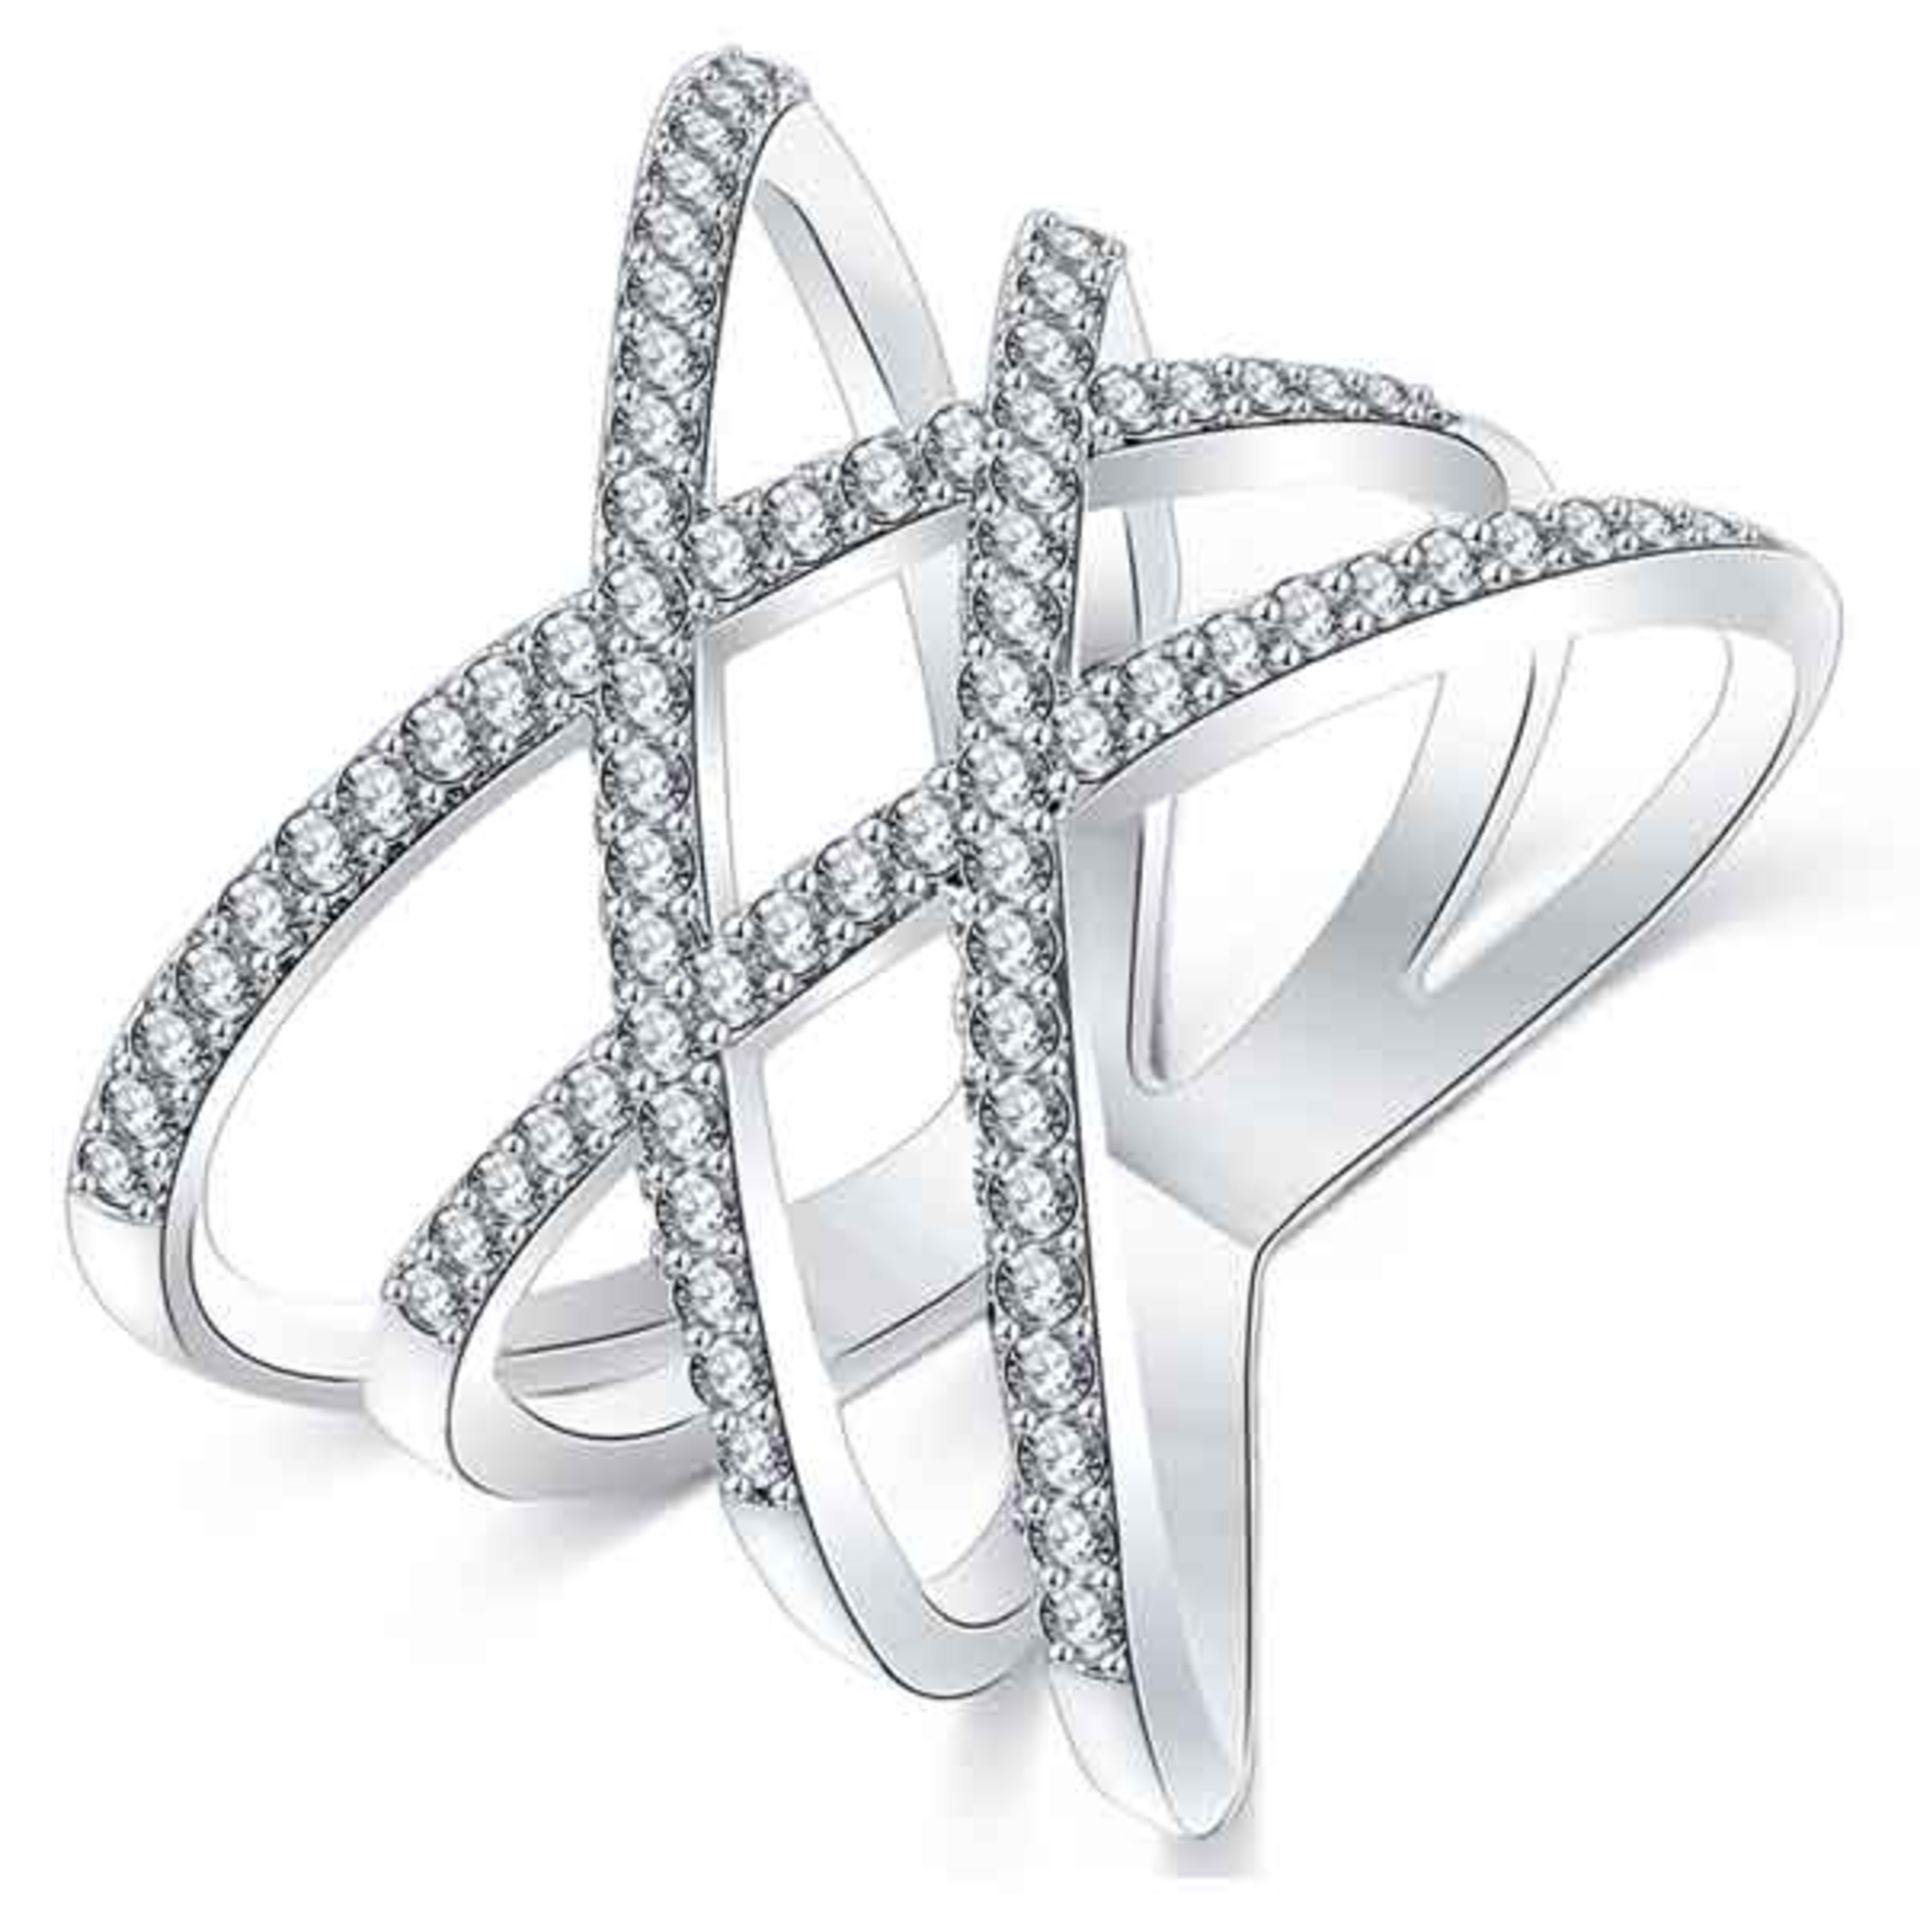 V Brand New Platinum Plated Double Cross Over Style Ring with Swarovski Elements